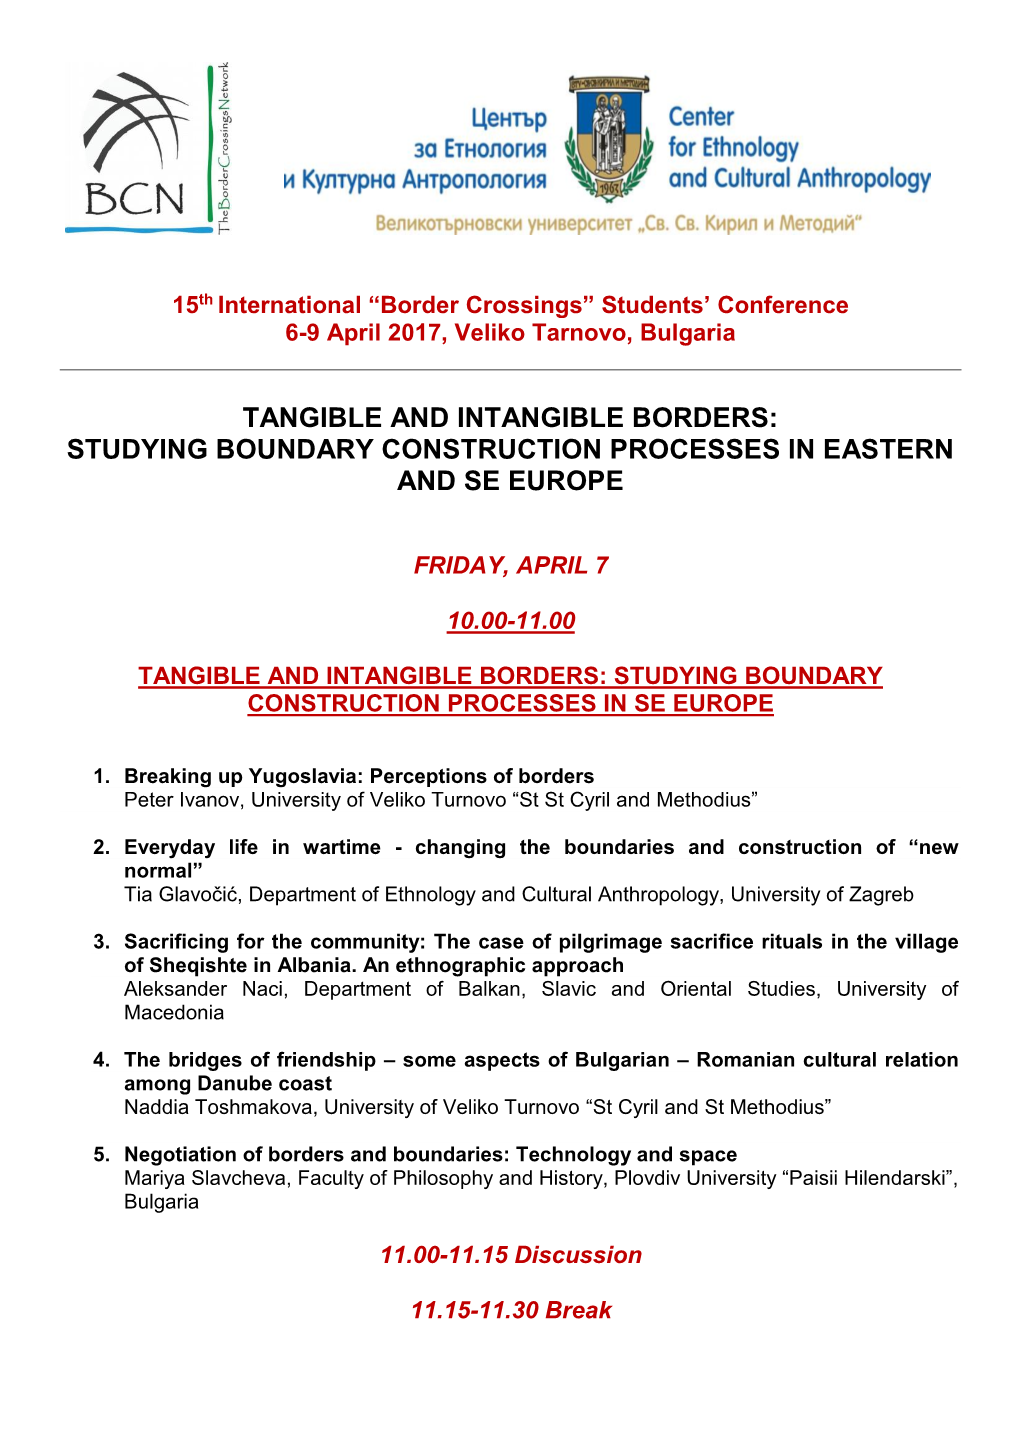 Tangible and Intangible Borders: Studying Boundary Construction Processes in Eastern and Se Europe